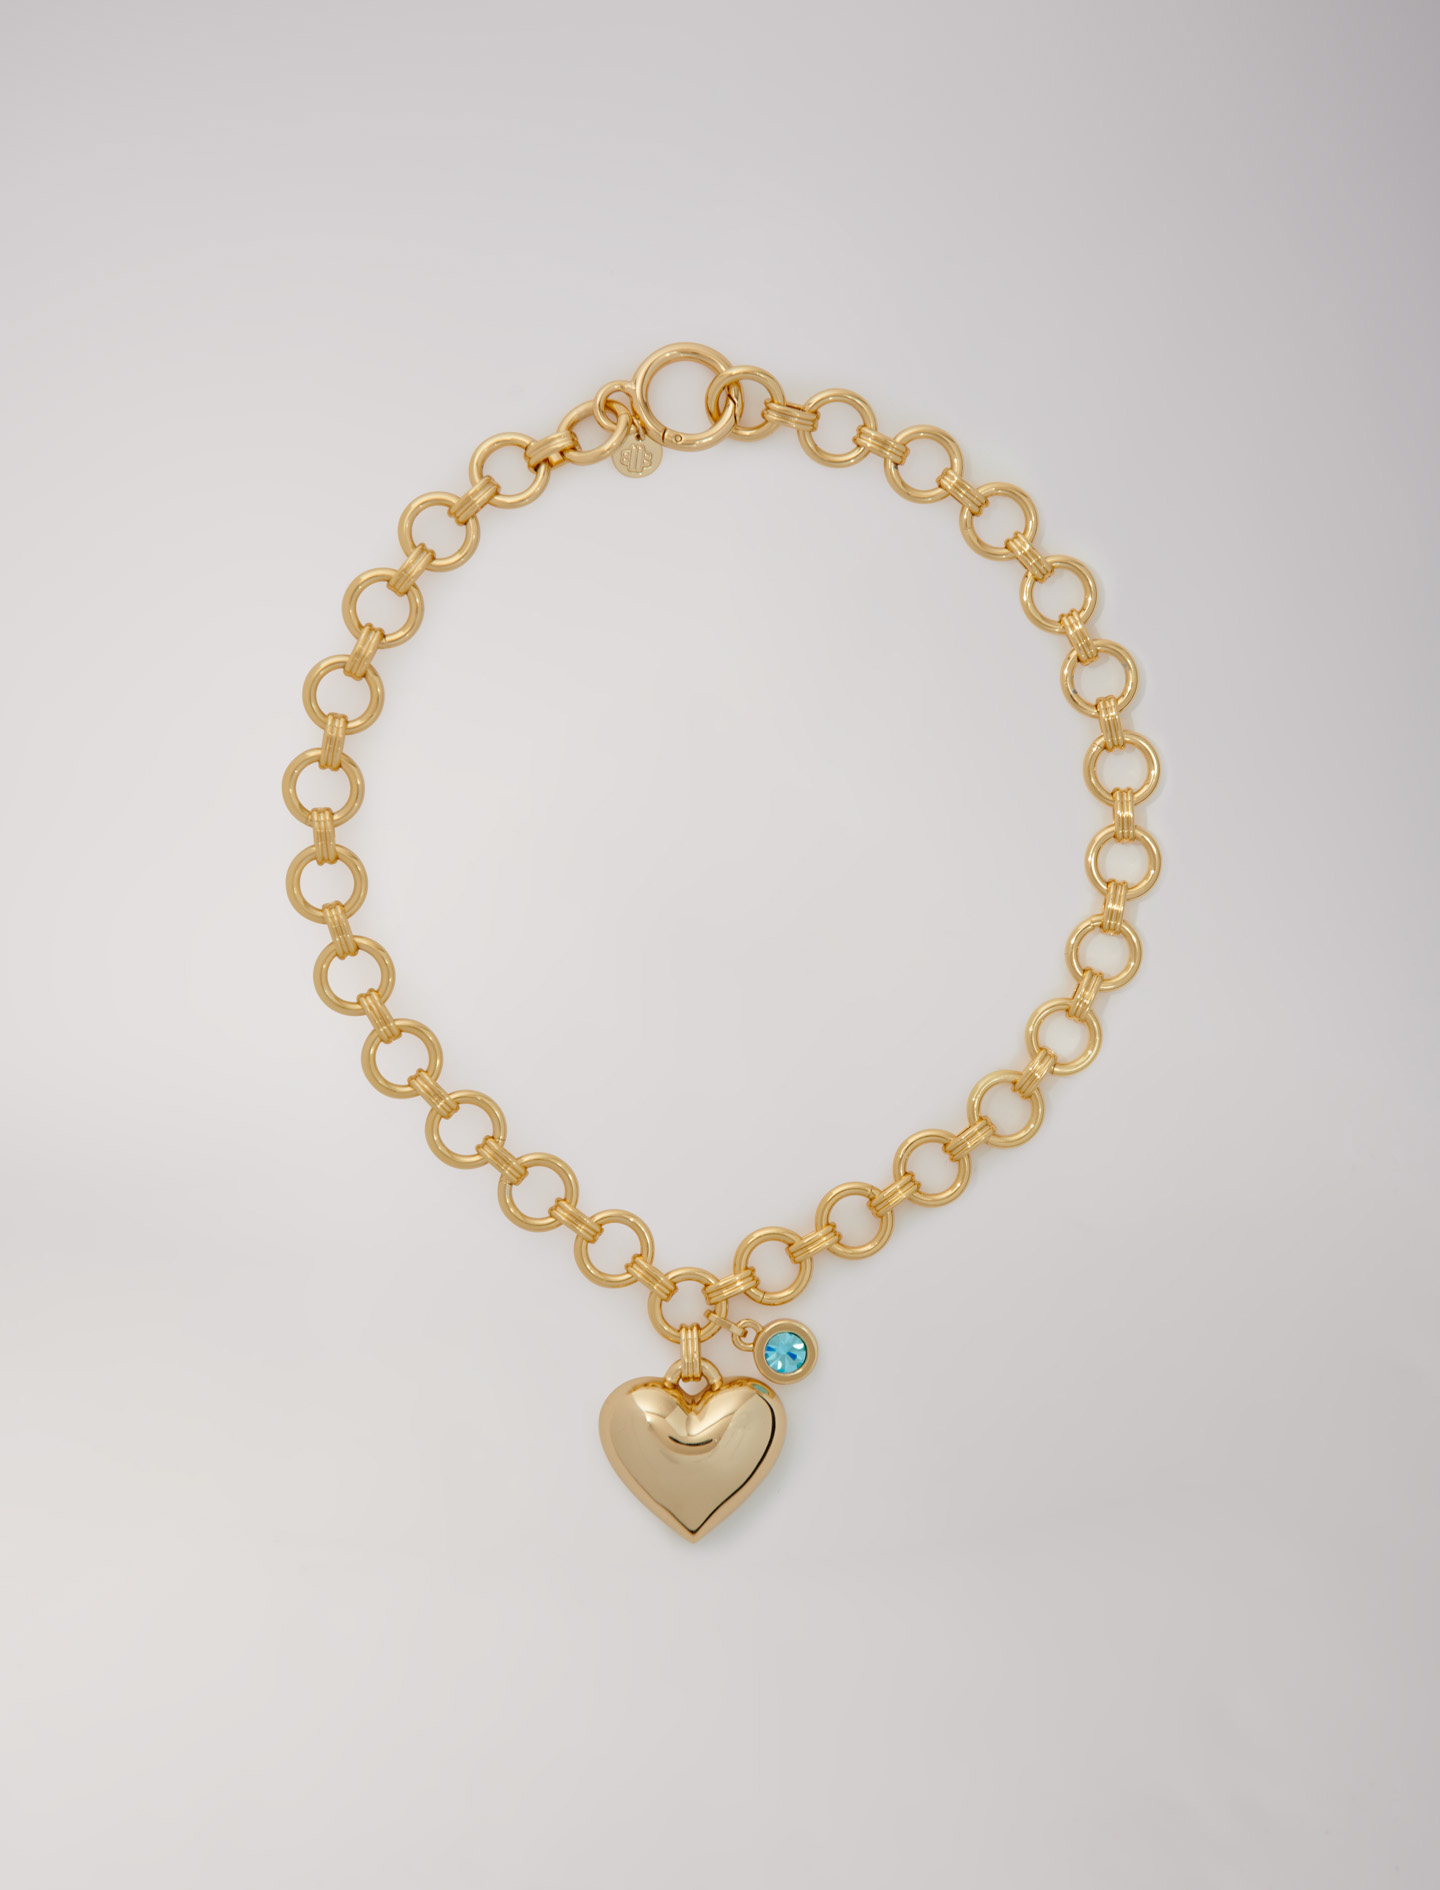 Woman's brass, Gold heart necklace for Fall/Winter, size Woman-Jewelry-OS (ONE SIZE), in color Gold / Yellow